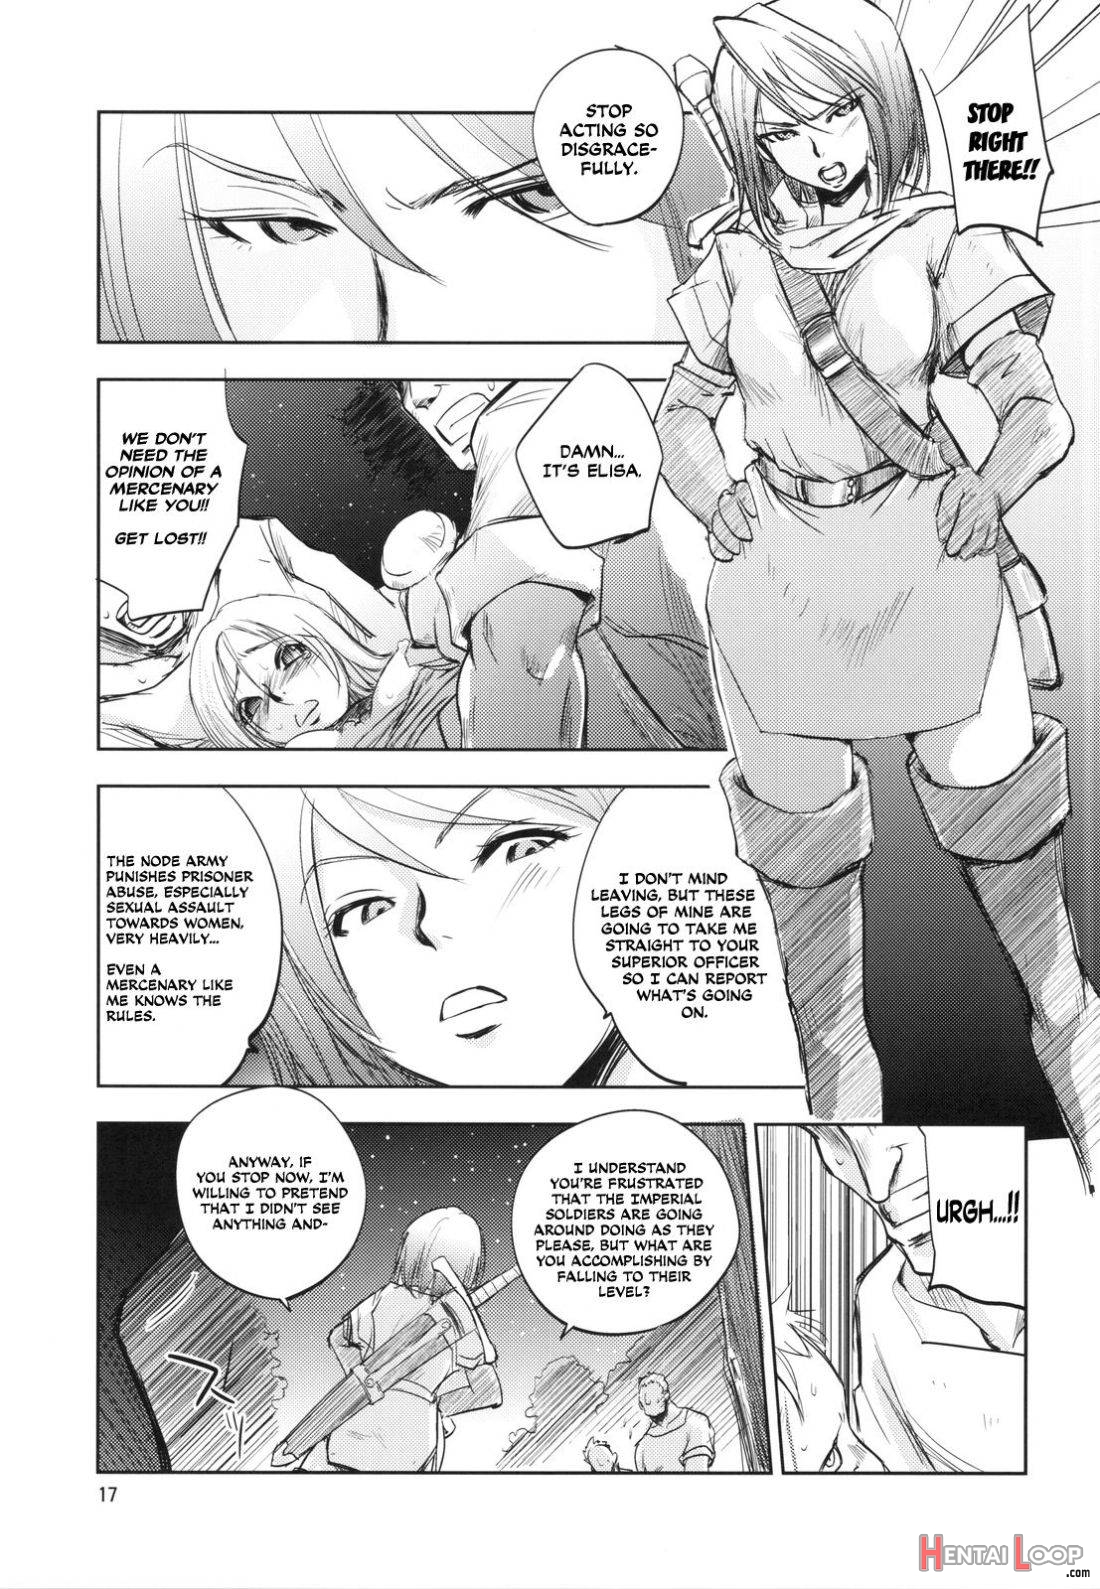 Grassen’s War Another Story Ex #01 The Node Aggression I page 16